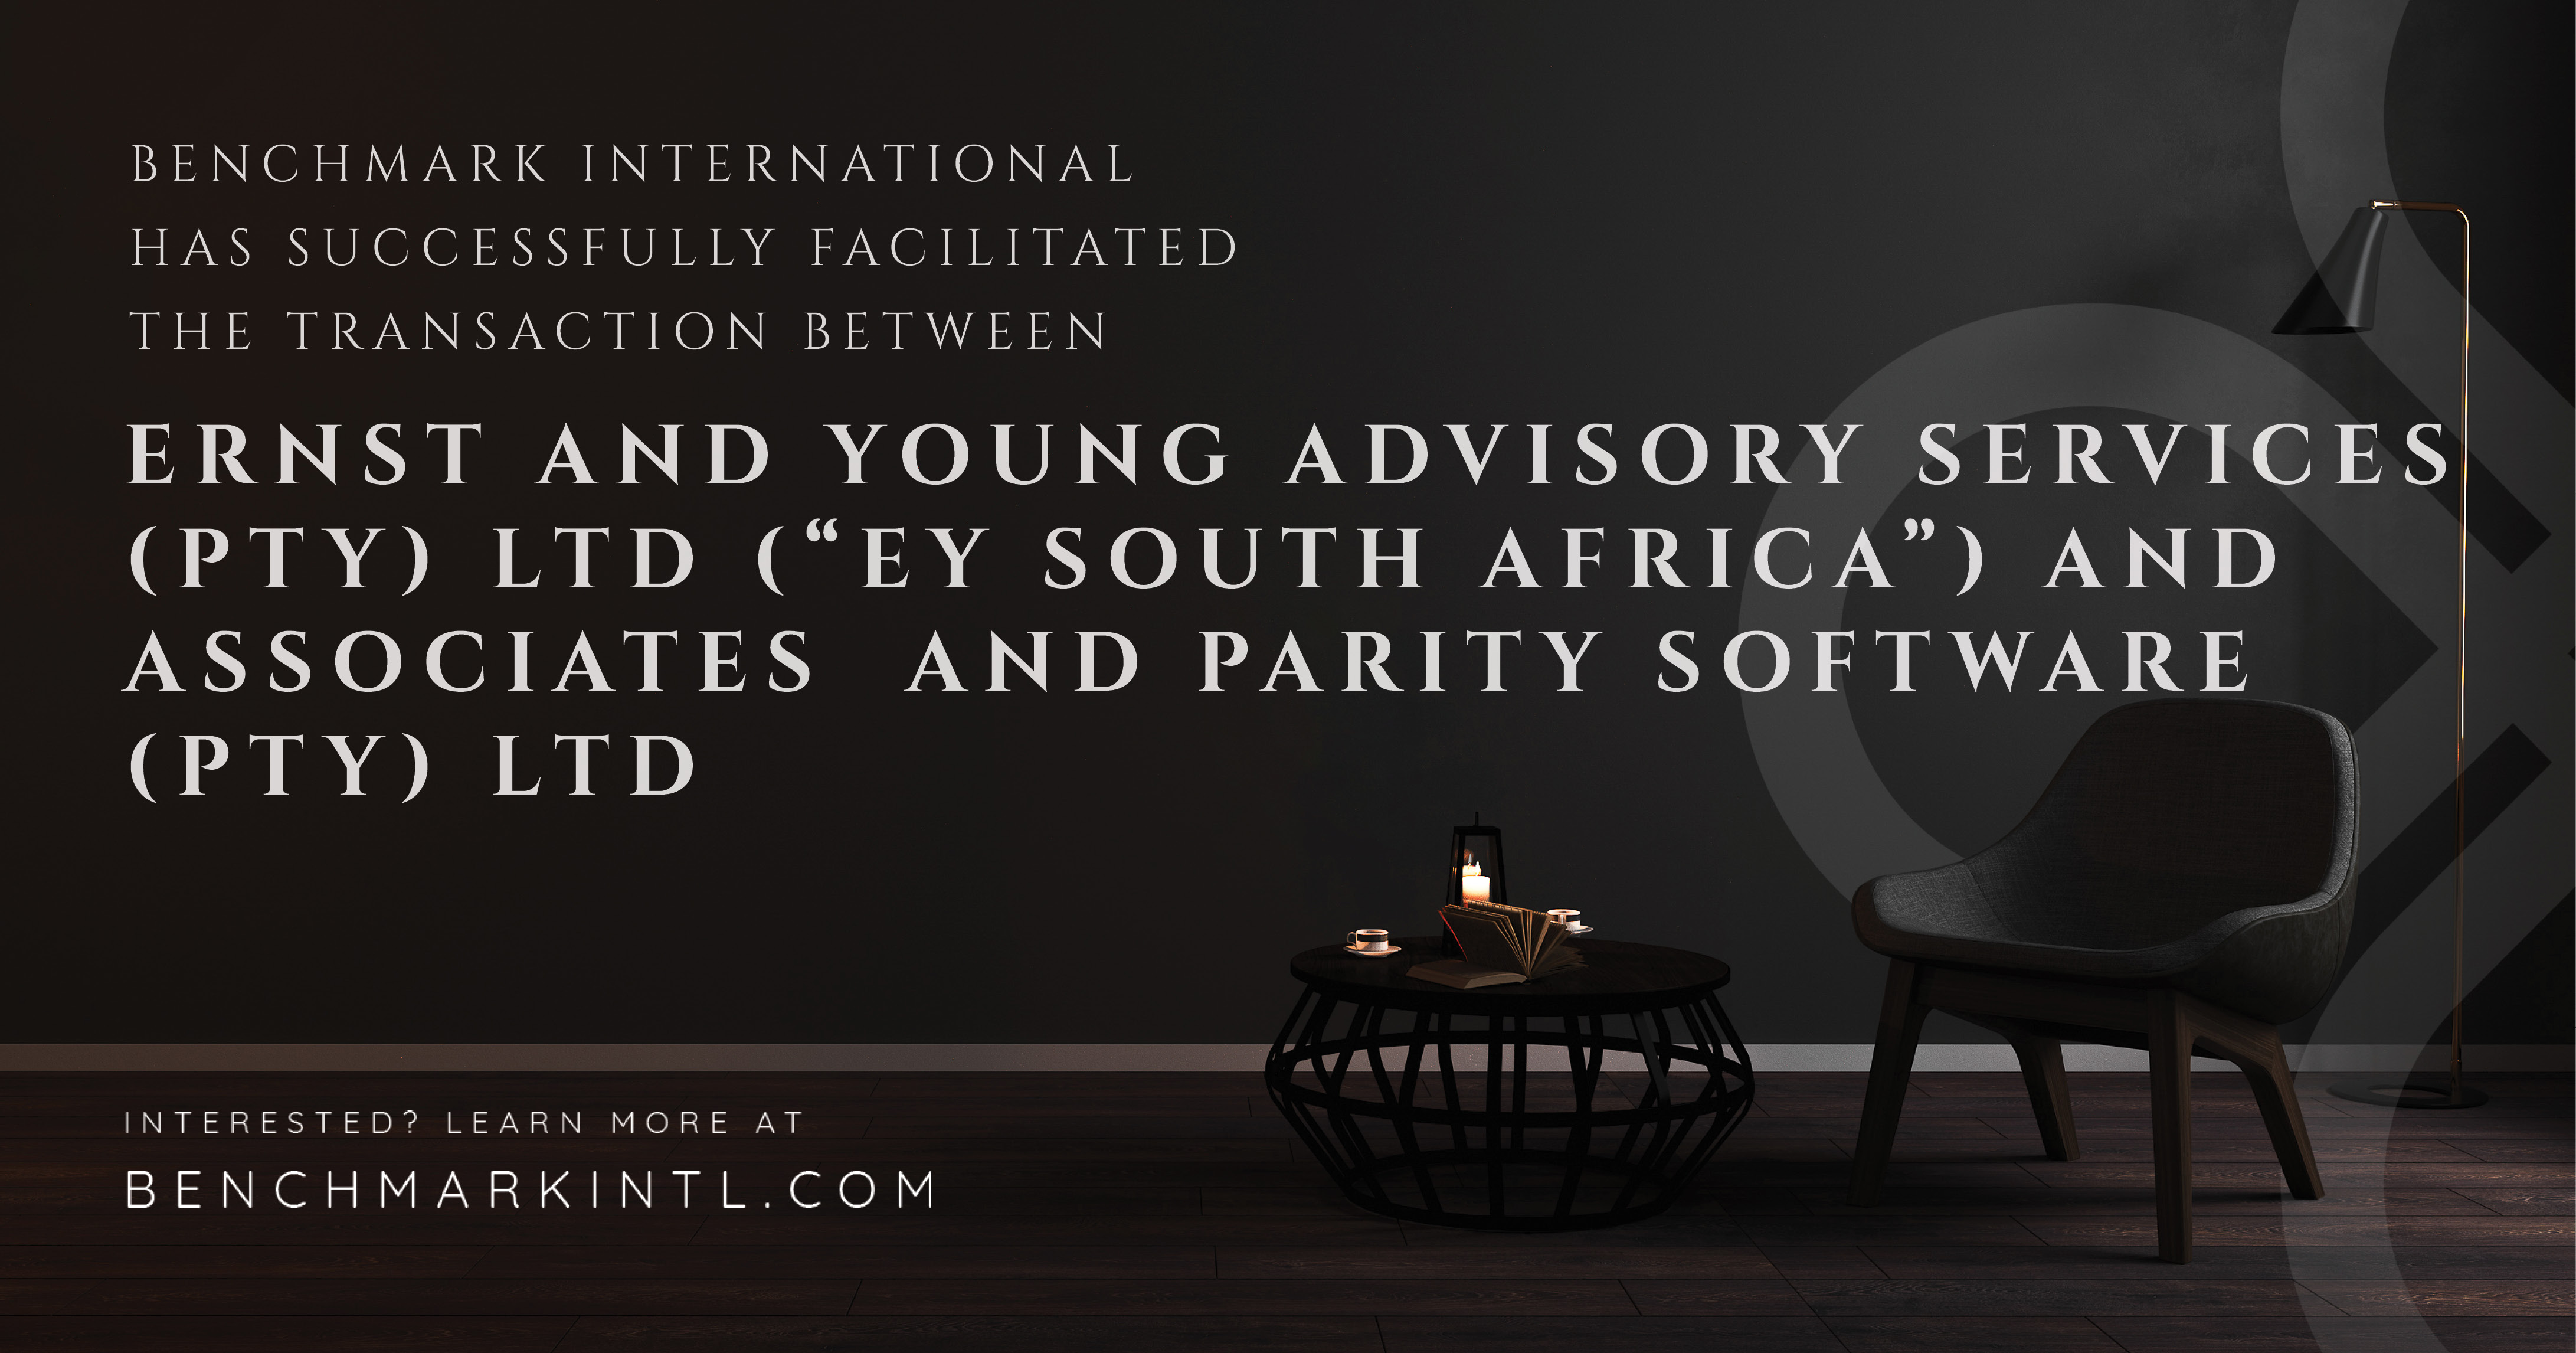 Benchmark International Facilitated The Transaction Between Ernst and Young Advisory Services (Pty) Ltd (“ey South Africa”) And Parity Software (Pty) Ltd